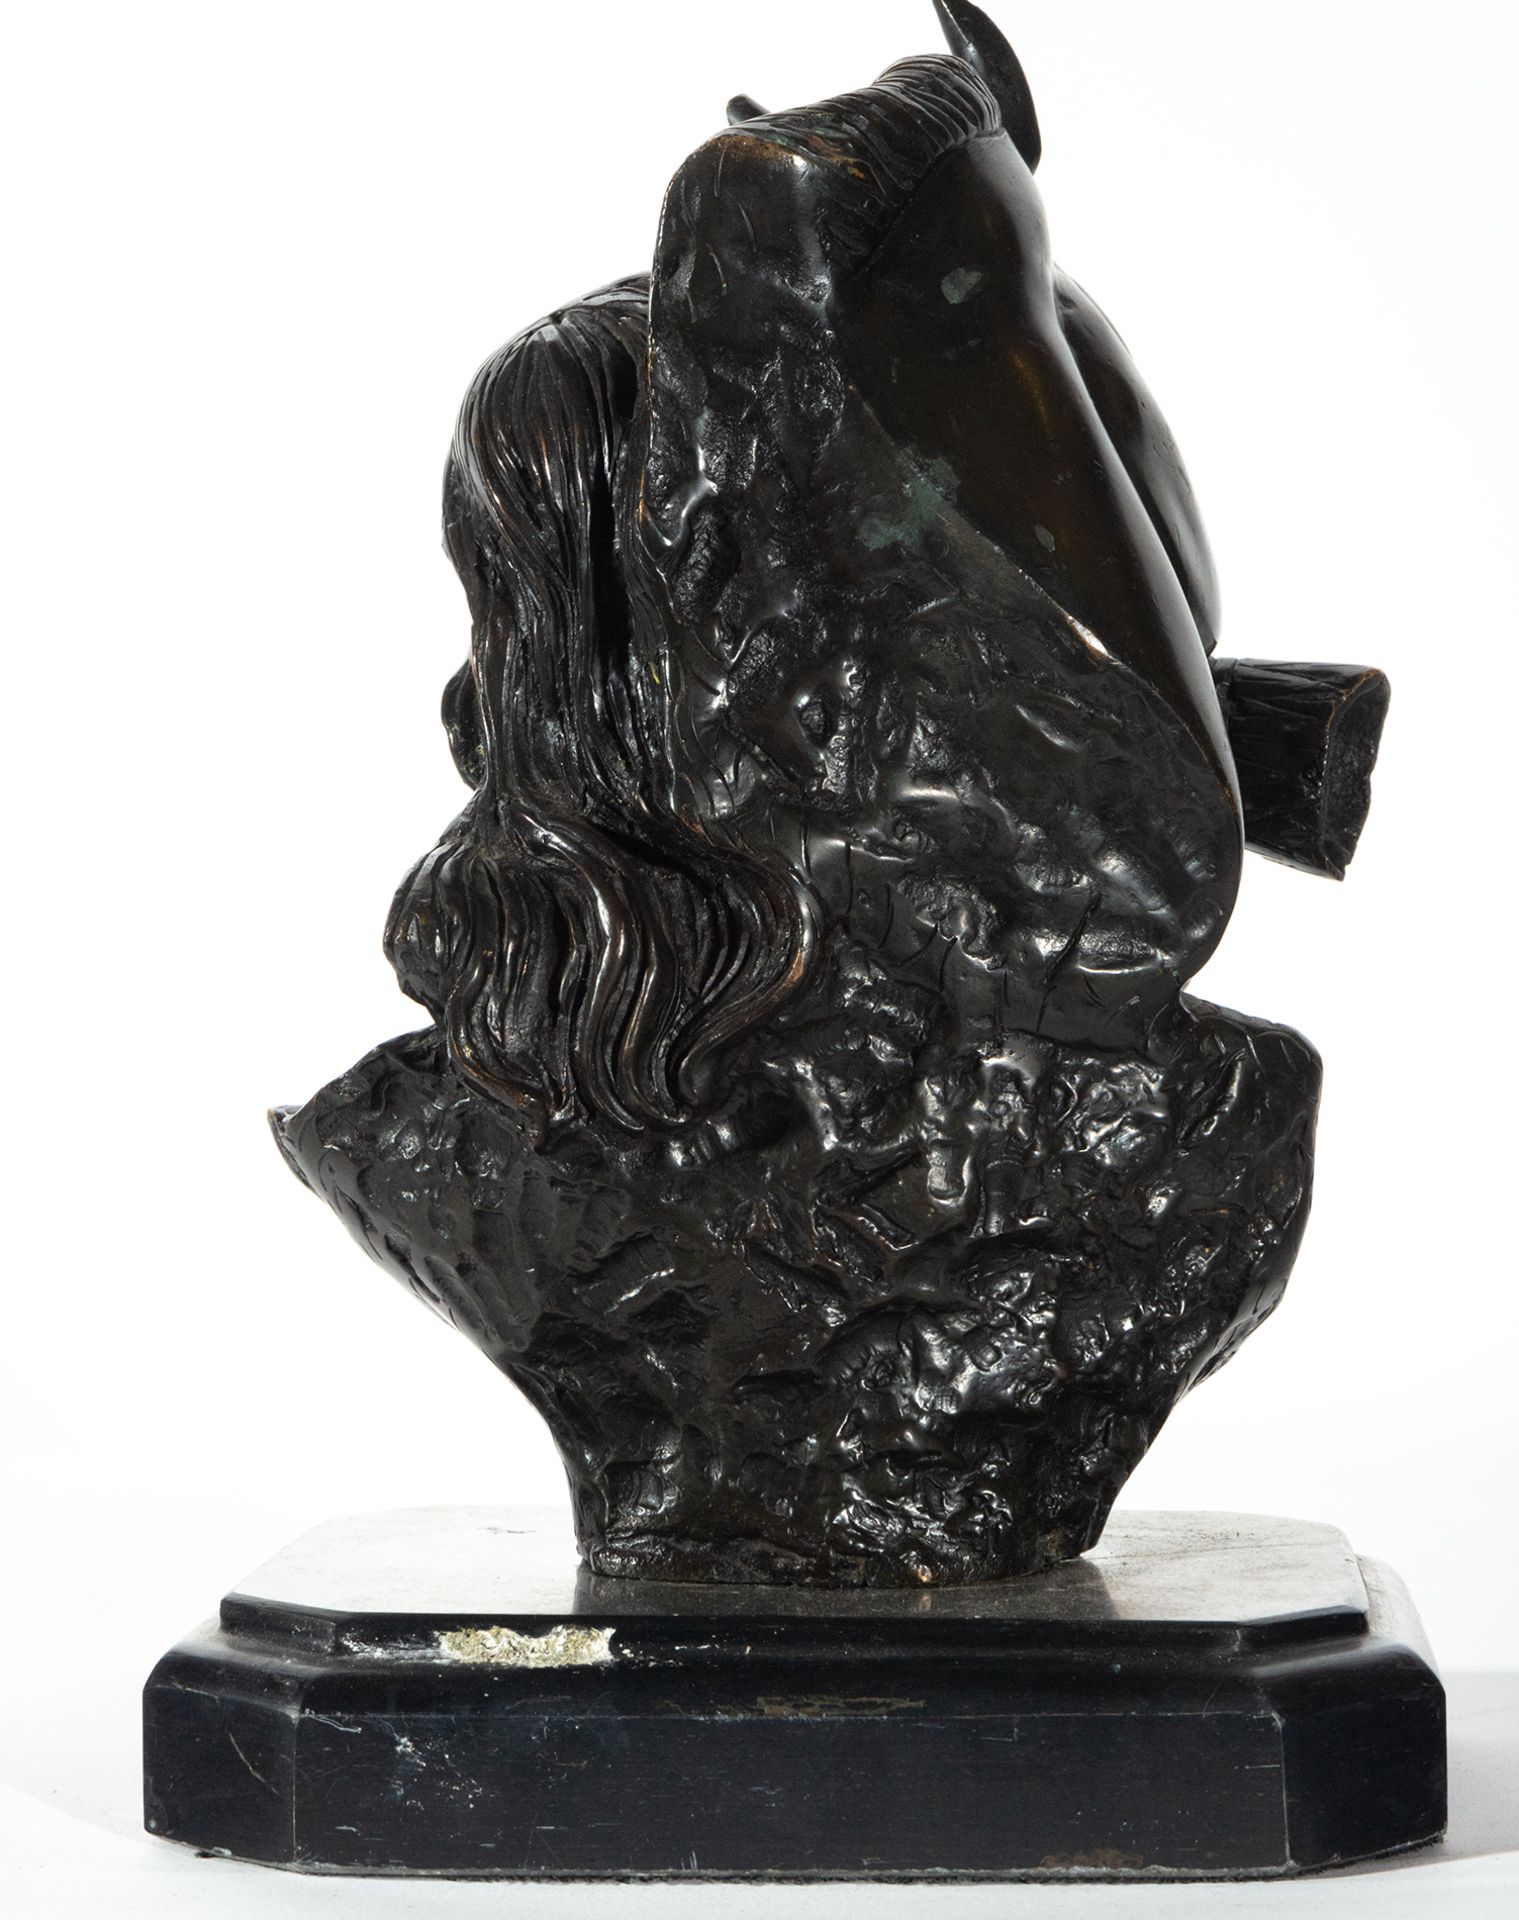 Girl with Horse in Bronze, 20th century - Image 4 of 4